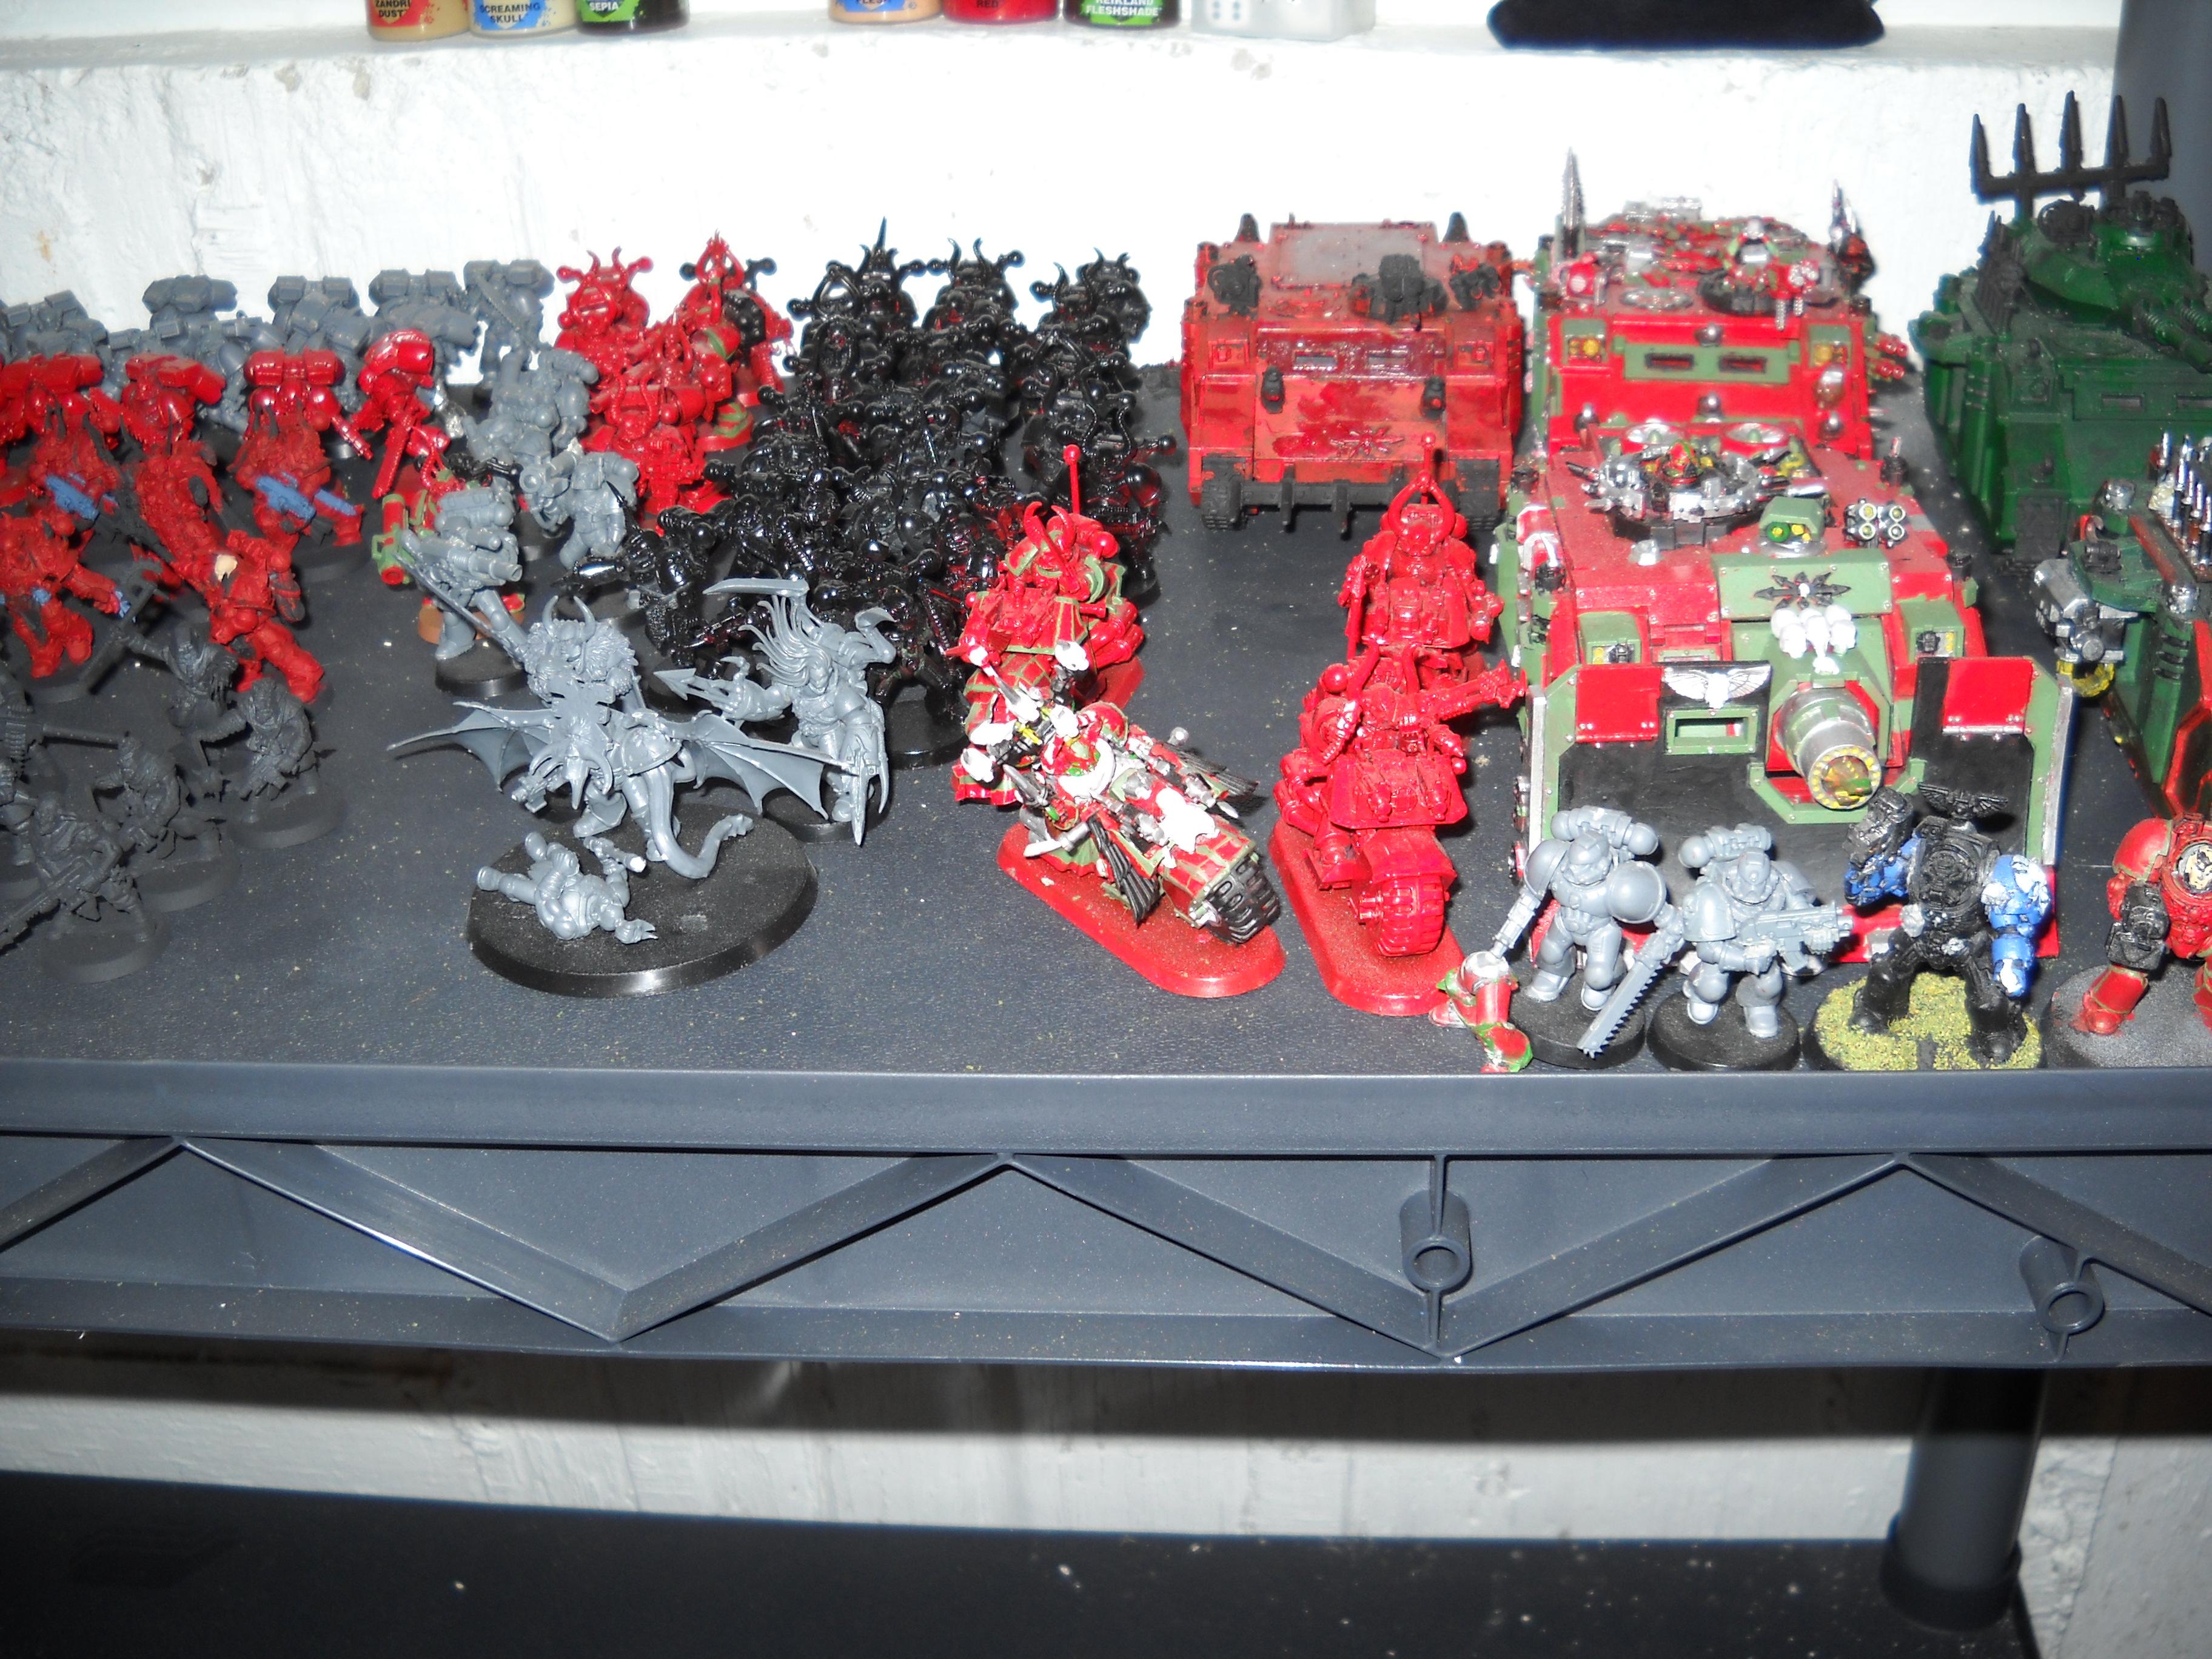 Army, Berzerker, Black Legion, Blood, Chaos, Chaos Space Marines, Cult, God, Khorne, Lord, World Eaters